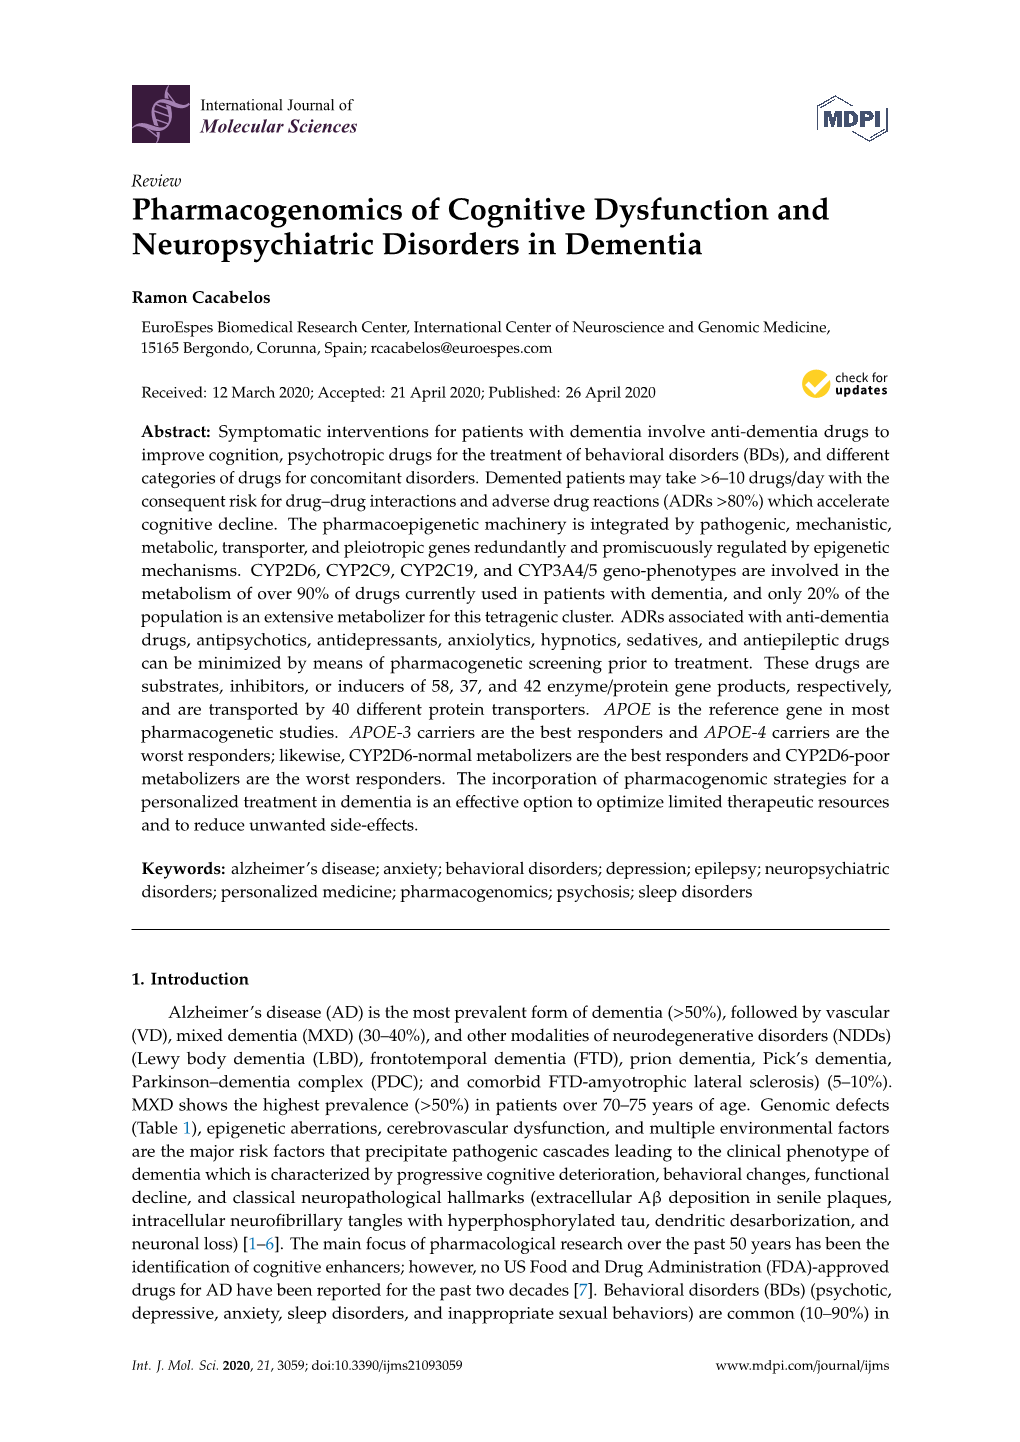 Pharmacogenomics of Cognitive Dysfunction and Neuropsychiatric Disorders in Dementia